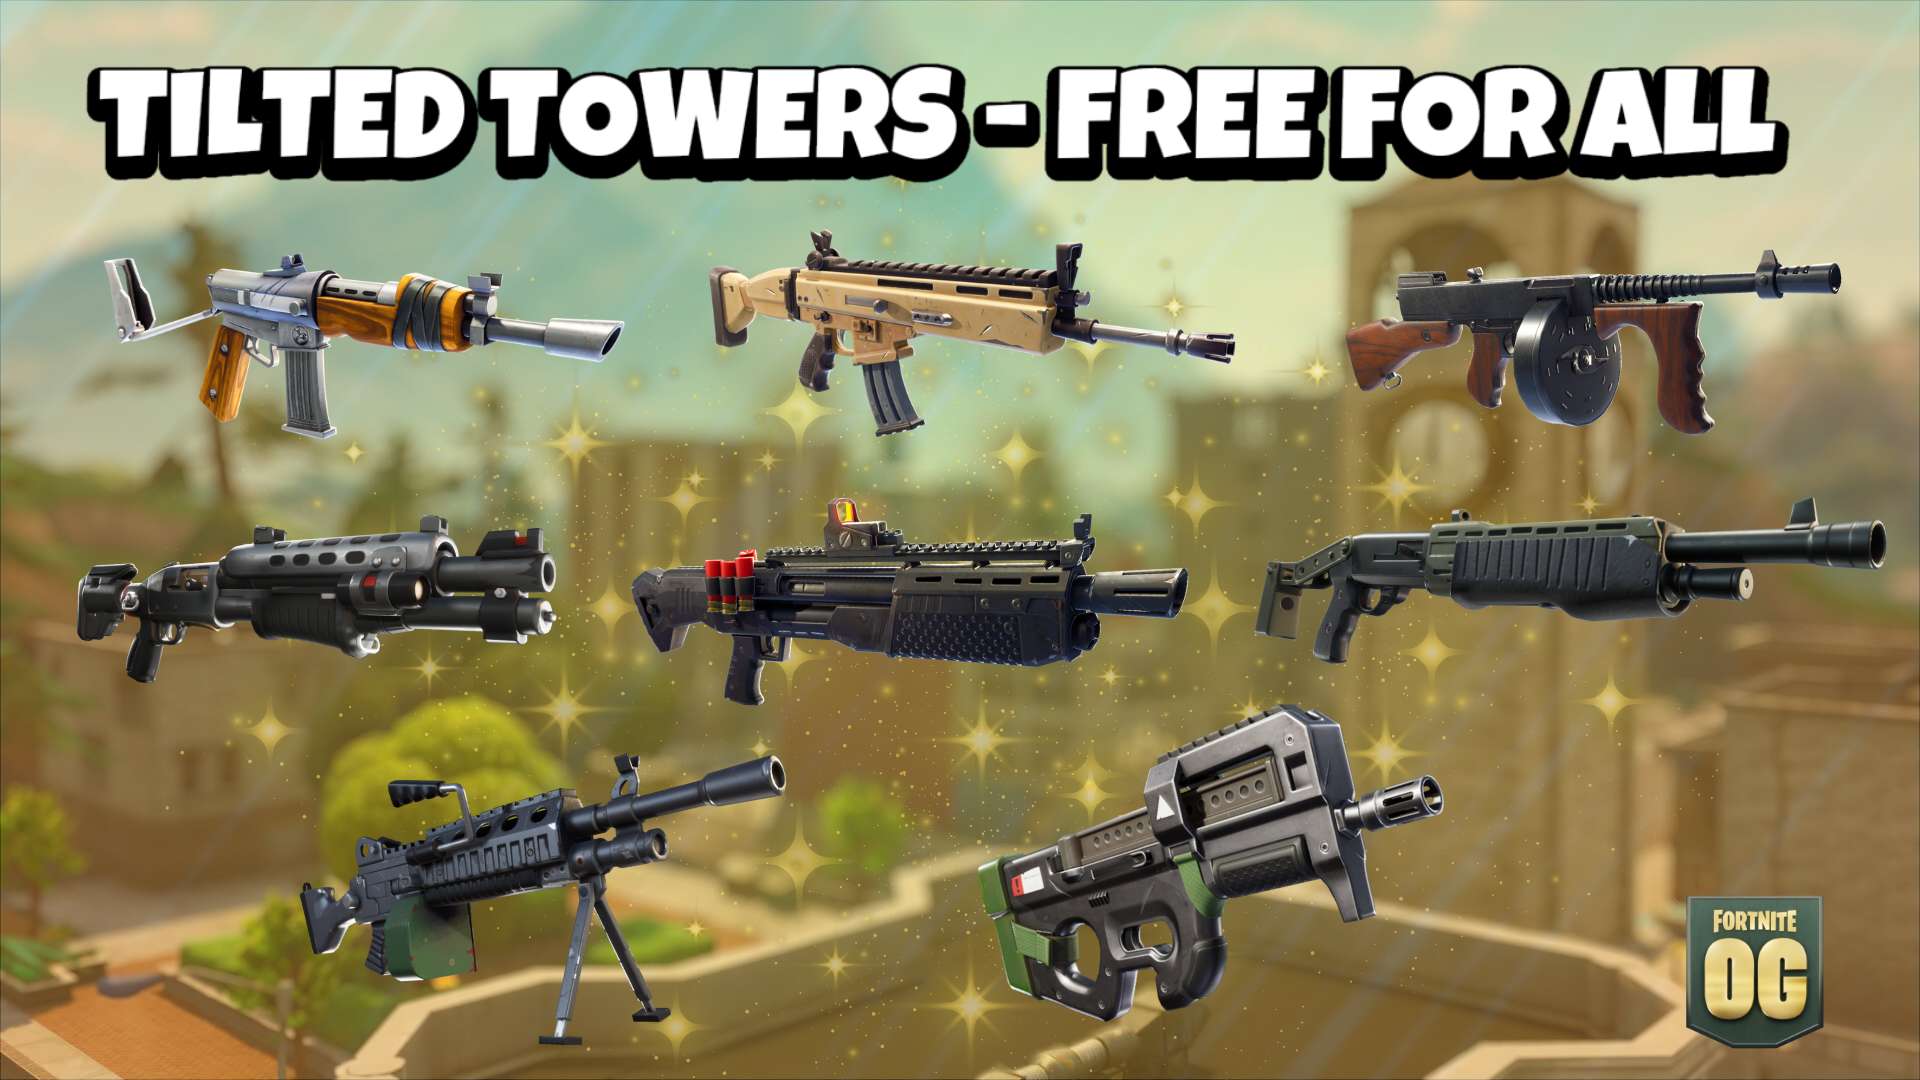 TILTED TOWERS - FREE FOR ALL